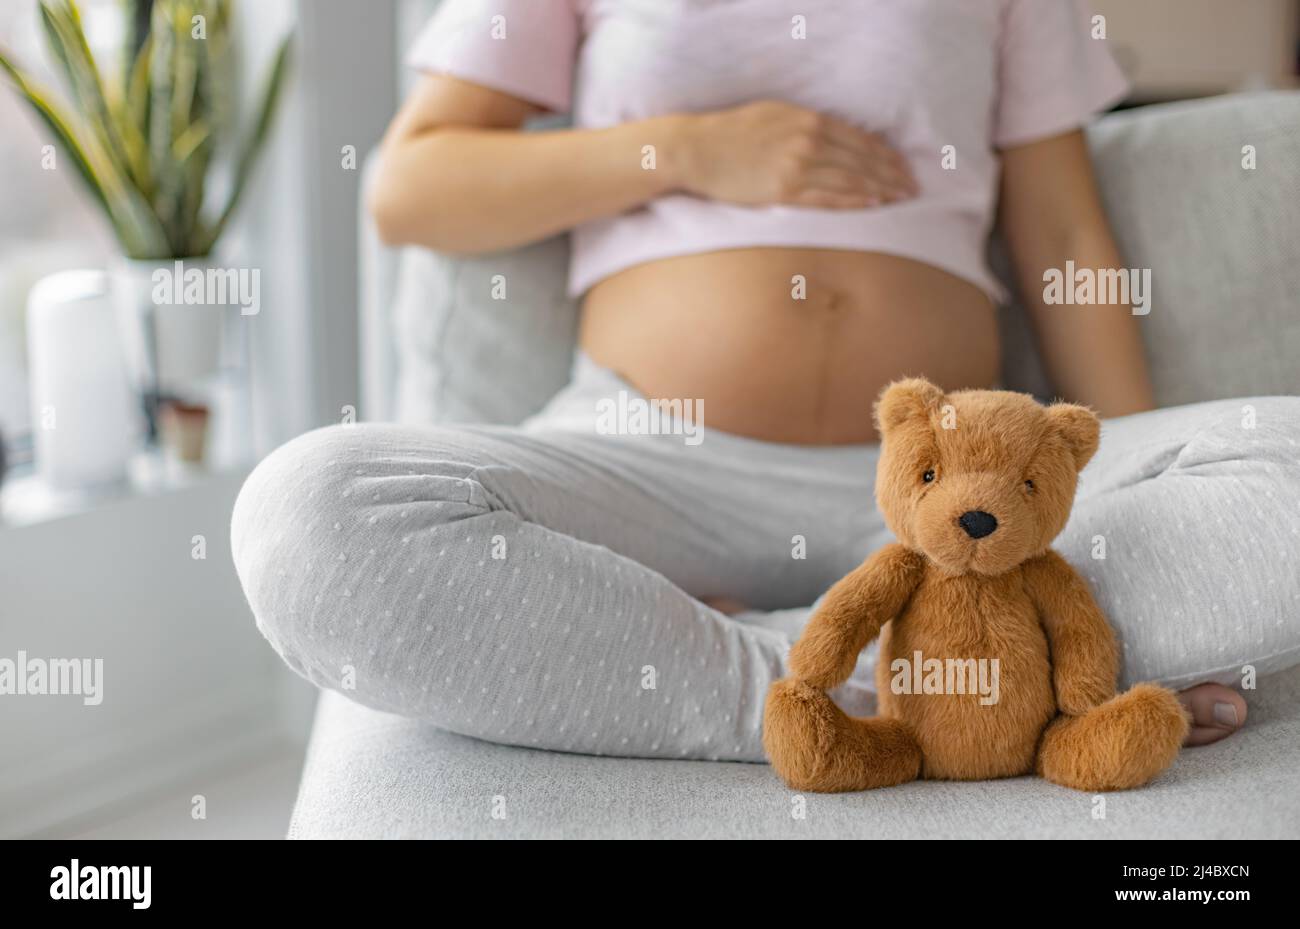 Pregnancy. Pregnant woman wearing maternity clothes relaxing on home sofa with teddy bear baby toy in focuse for baby shower gift concept or expecting Stock Photo